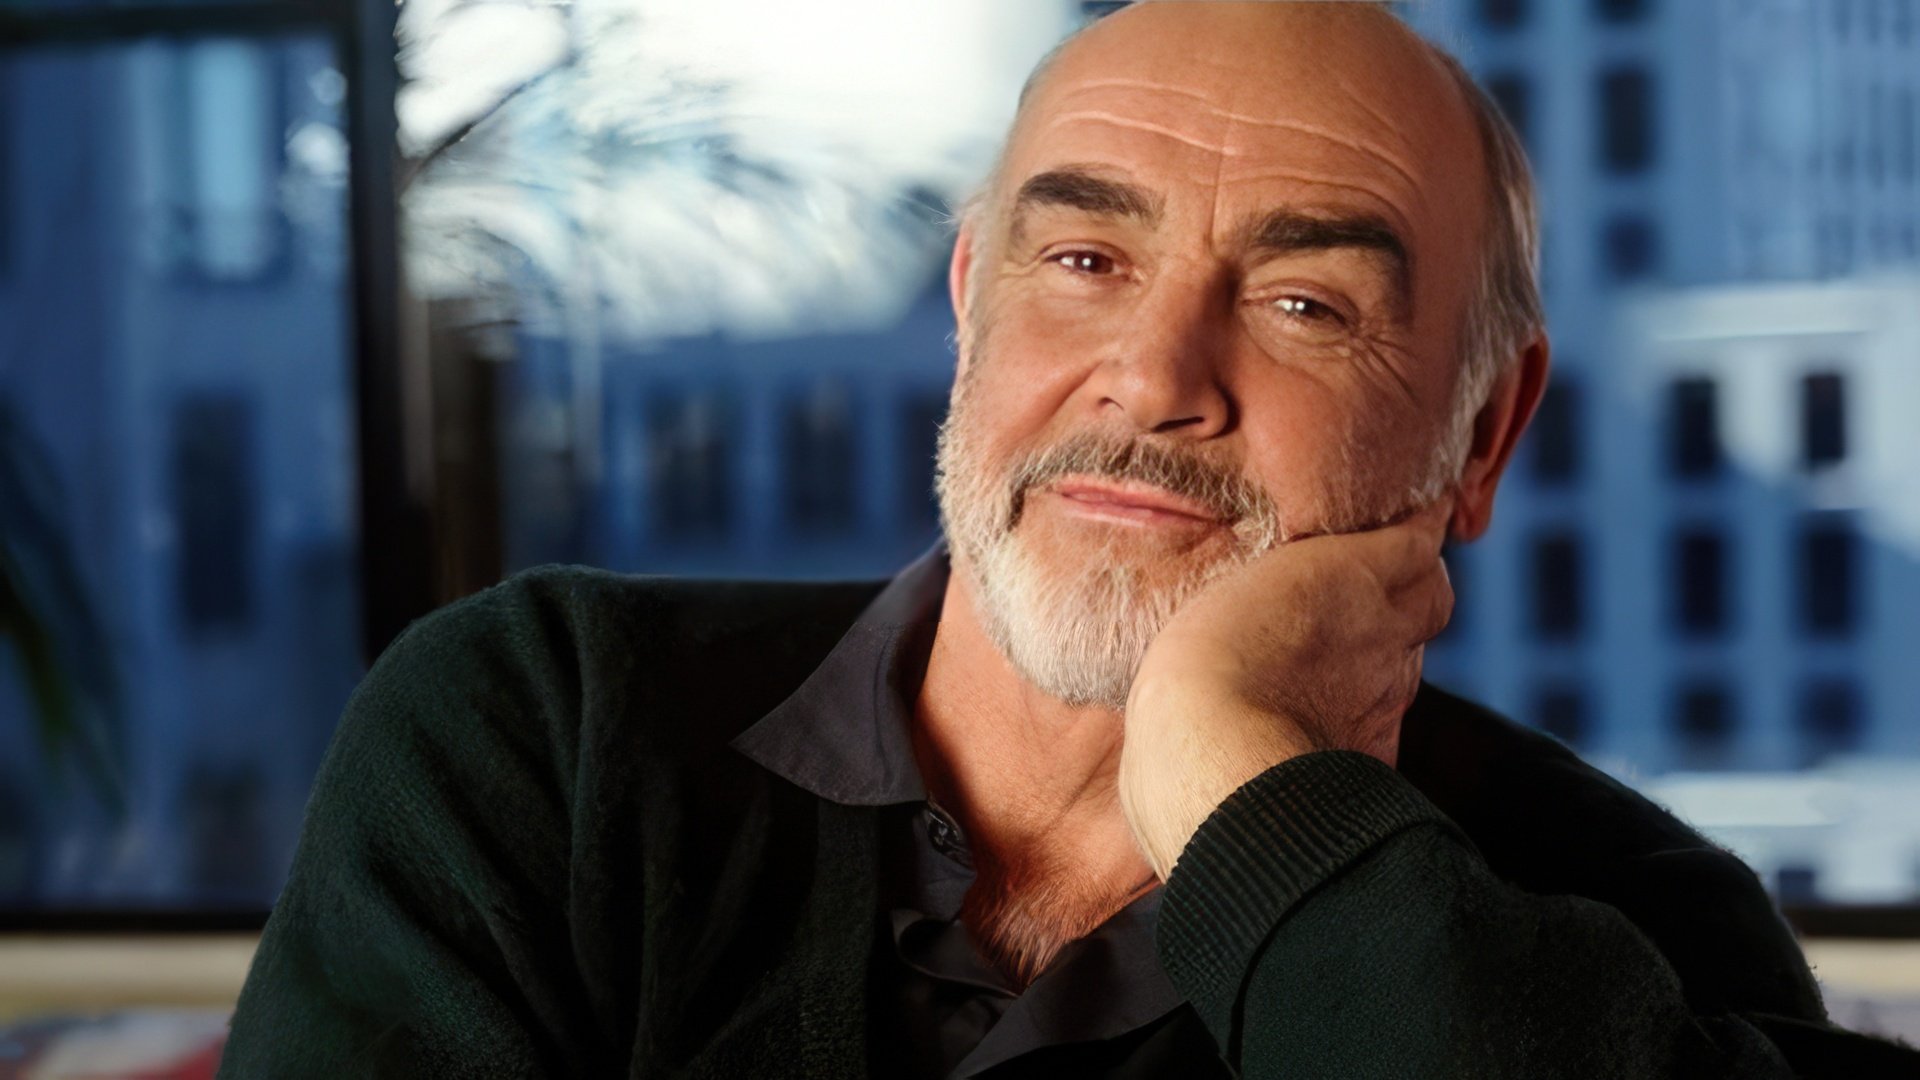 On the photo: Sean Connery